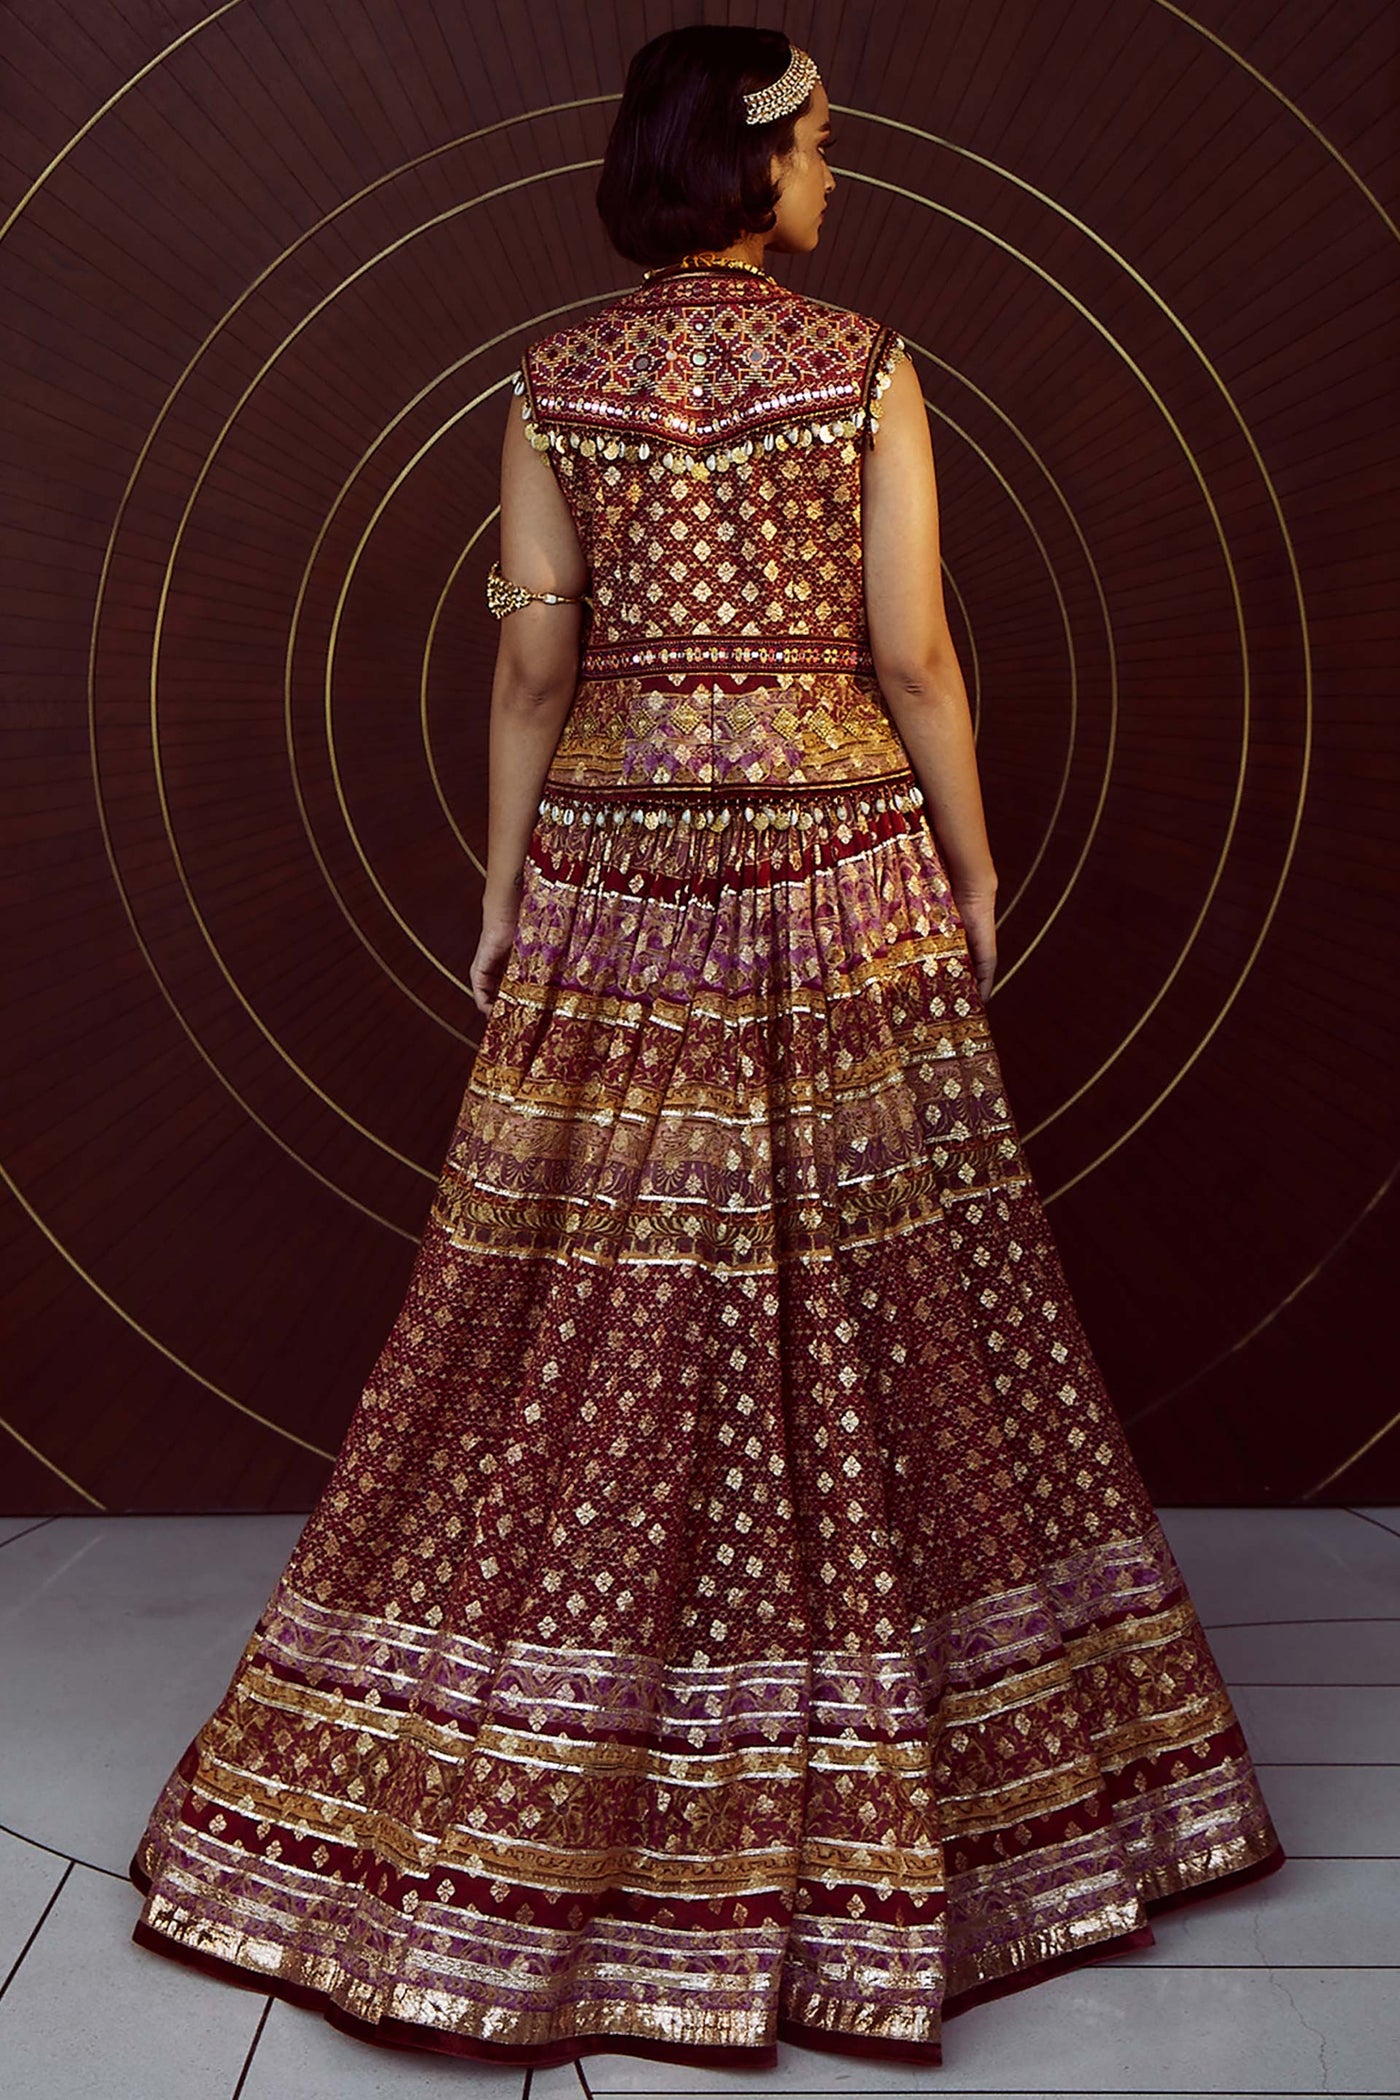 Tarun Tahiliani Resham And Mirror-Embroidered Gilet With Tribal Motifs And Shell And Coin Fringes brick red festive indian designer wear online shopping melange singapore bridal wedding